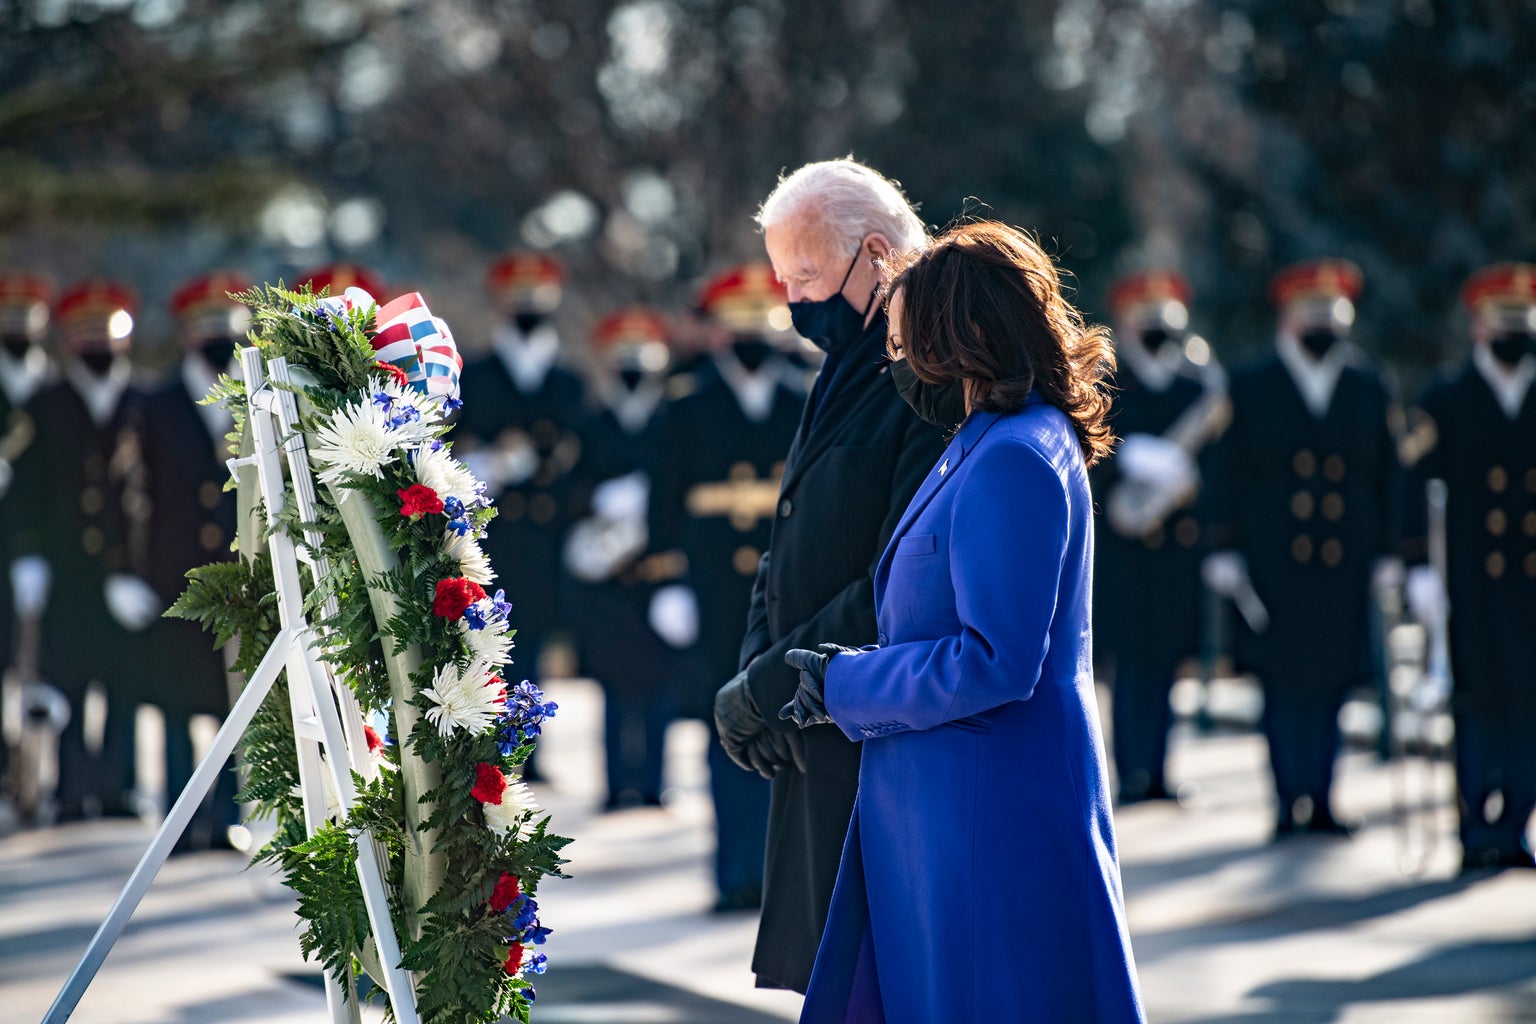 Joe Biden and Kamala Harris lay a wreath at the Tomb of the Unknown Soldier at Arlington National Cemetery